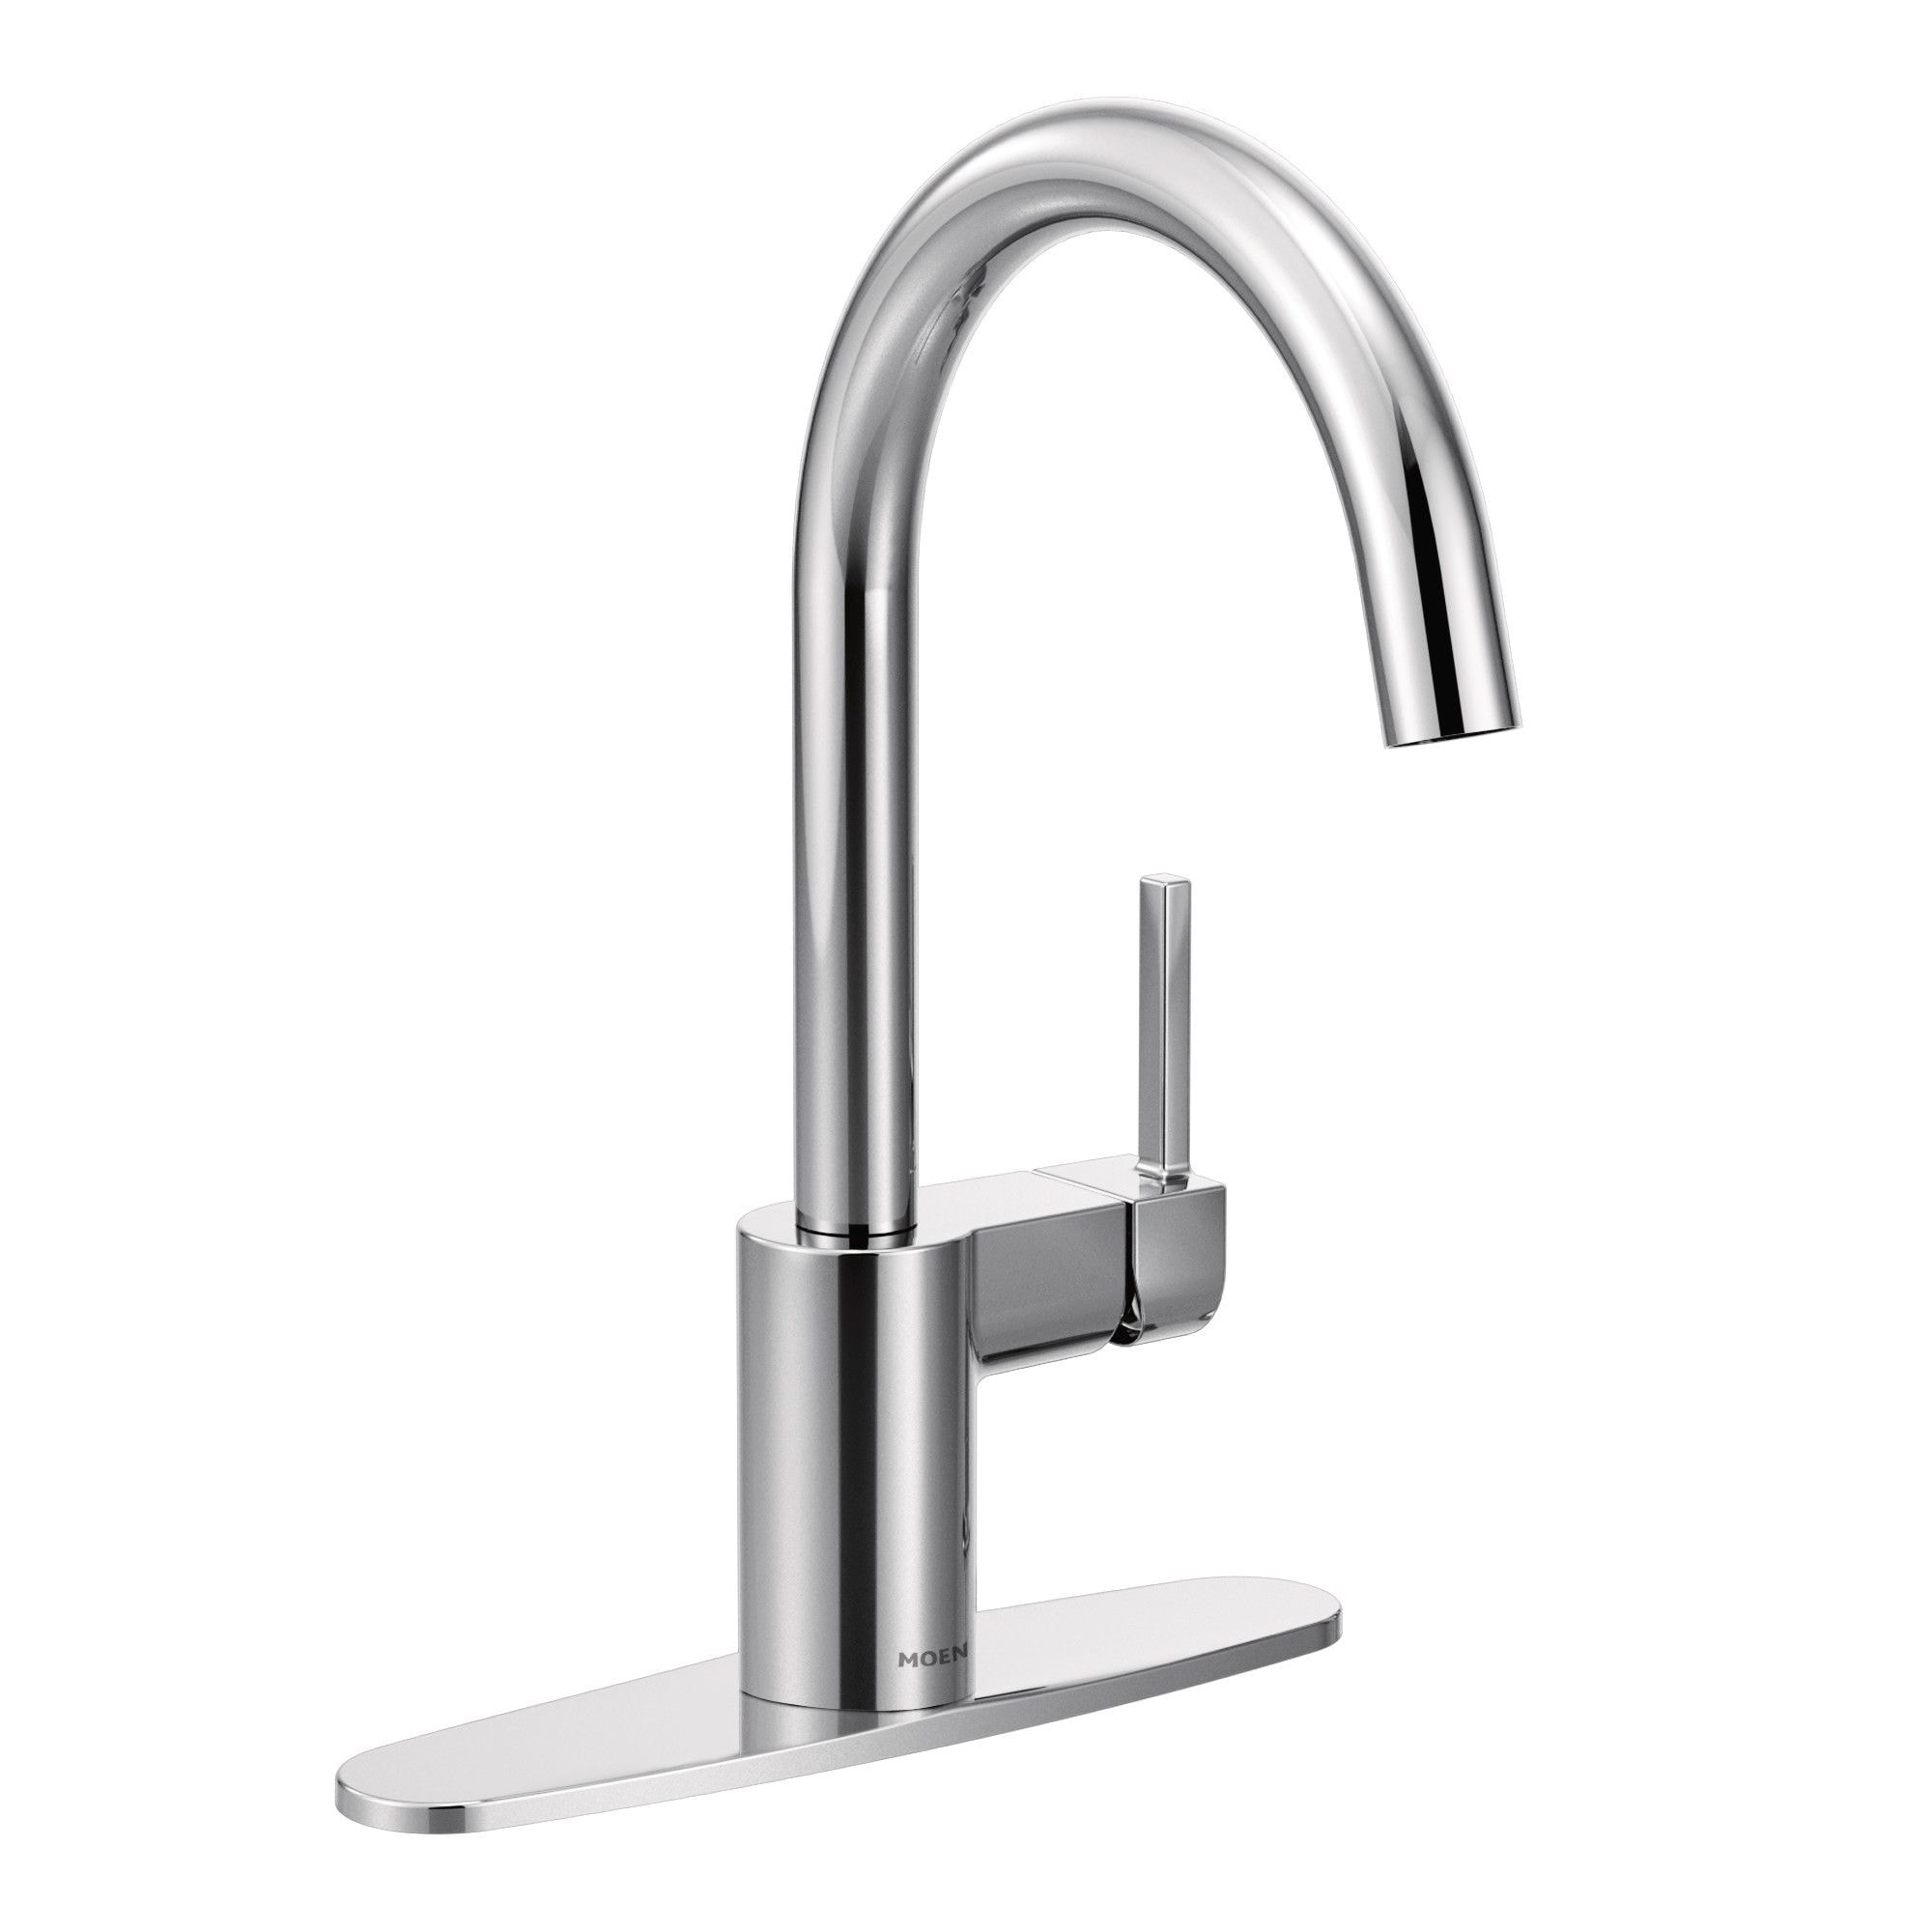 Moen Align Chrome Single Handle High-arc Kitchen Faucet with Sprayer in ...